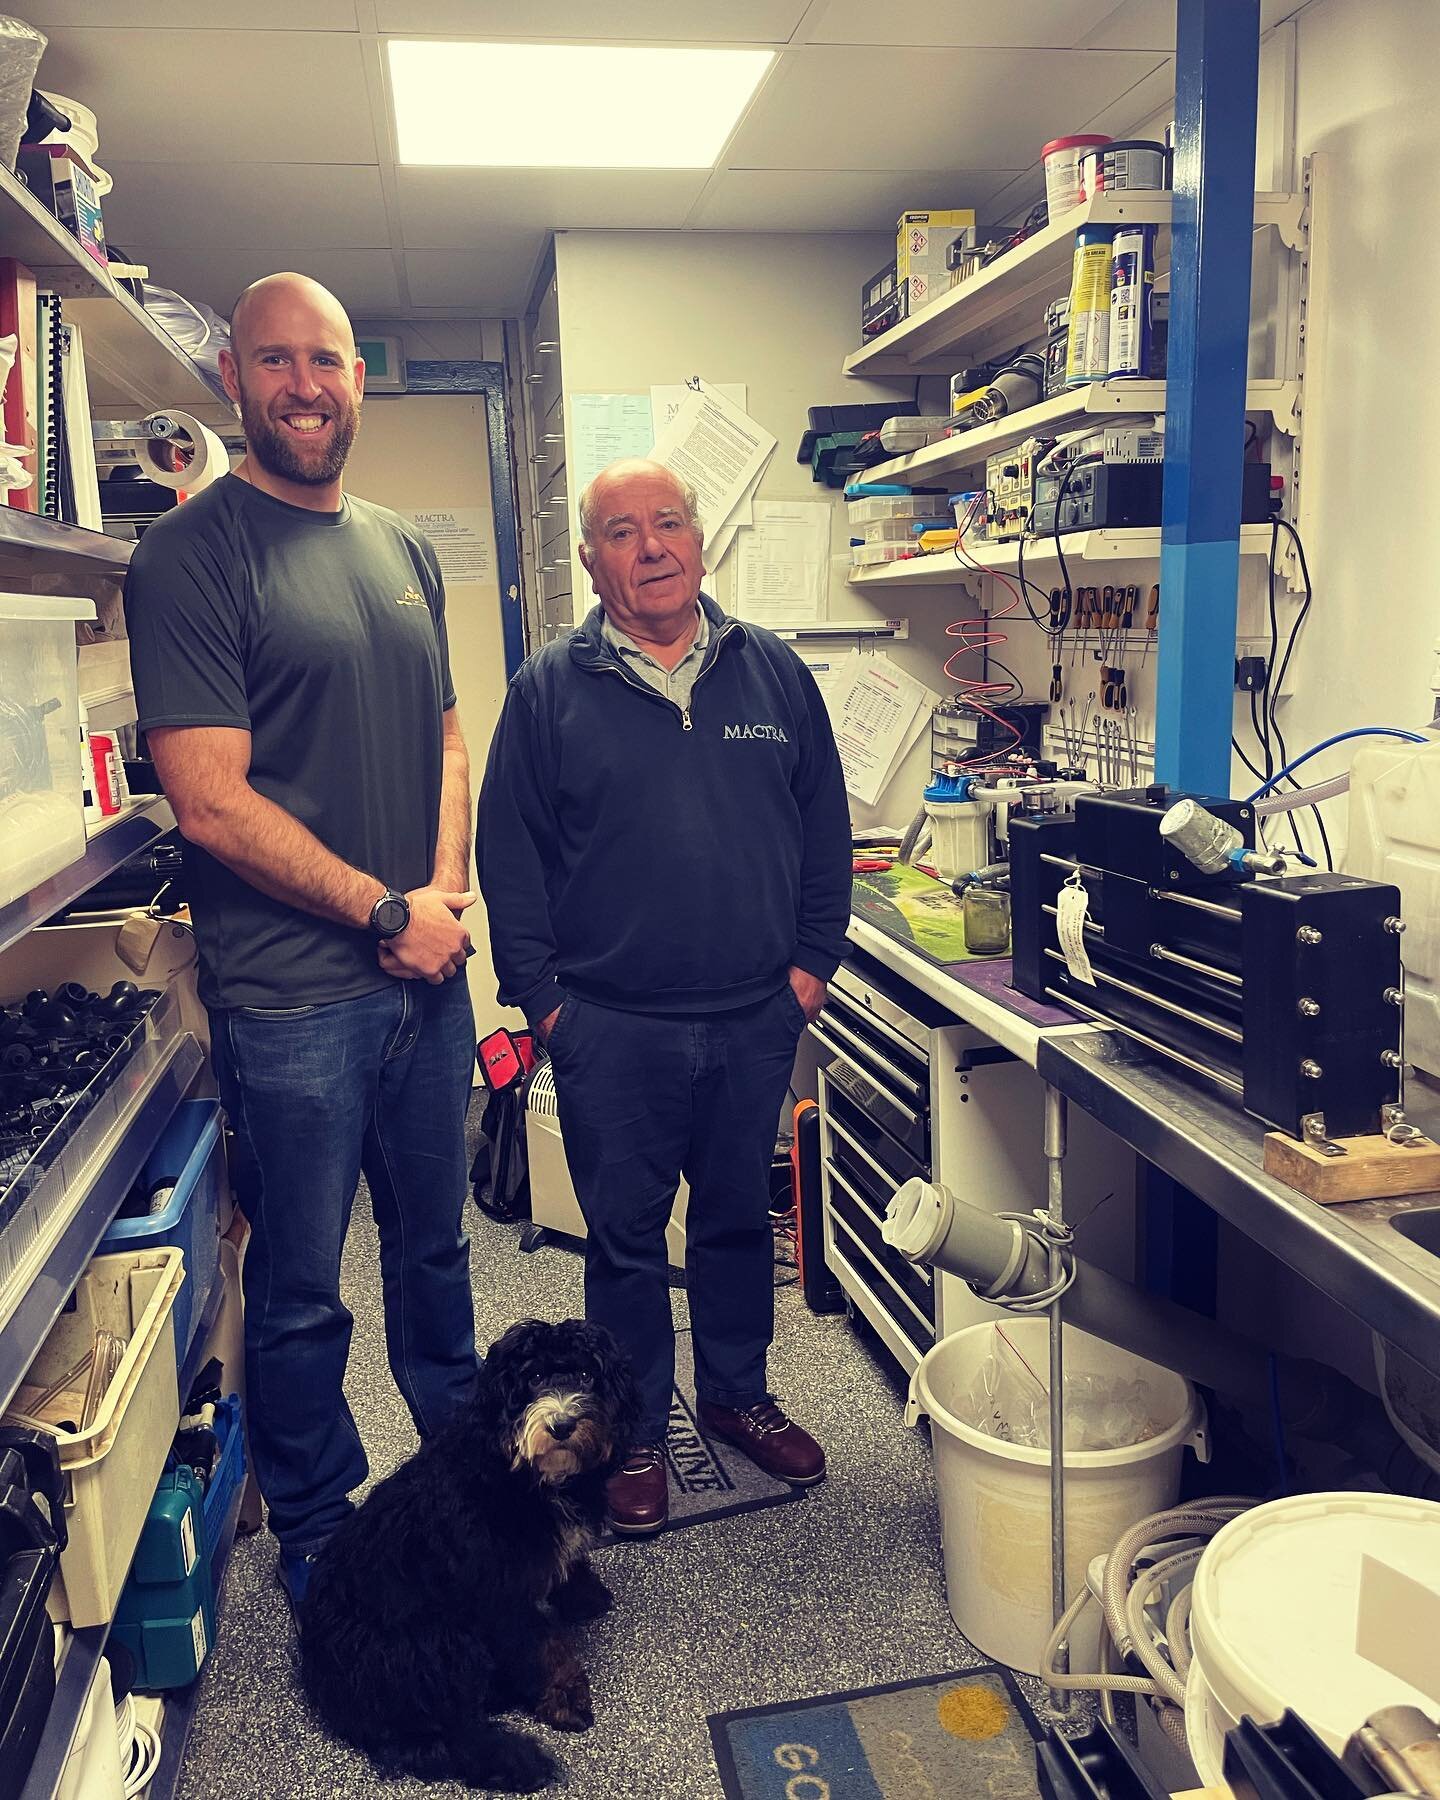 This morning we had Rob from @hmsoardacious visit us for a watermaker familiarisation session! He also got to meet Arthur the Cockapoo 🐶 #makewaterwithmactra #worldstoughestrowatlantic #schenkerwatermakers